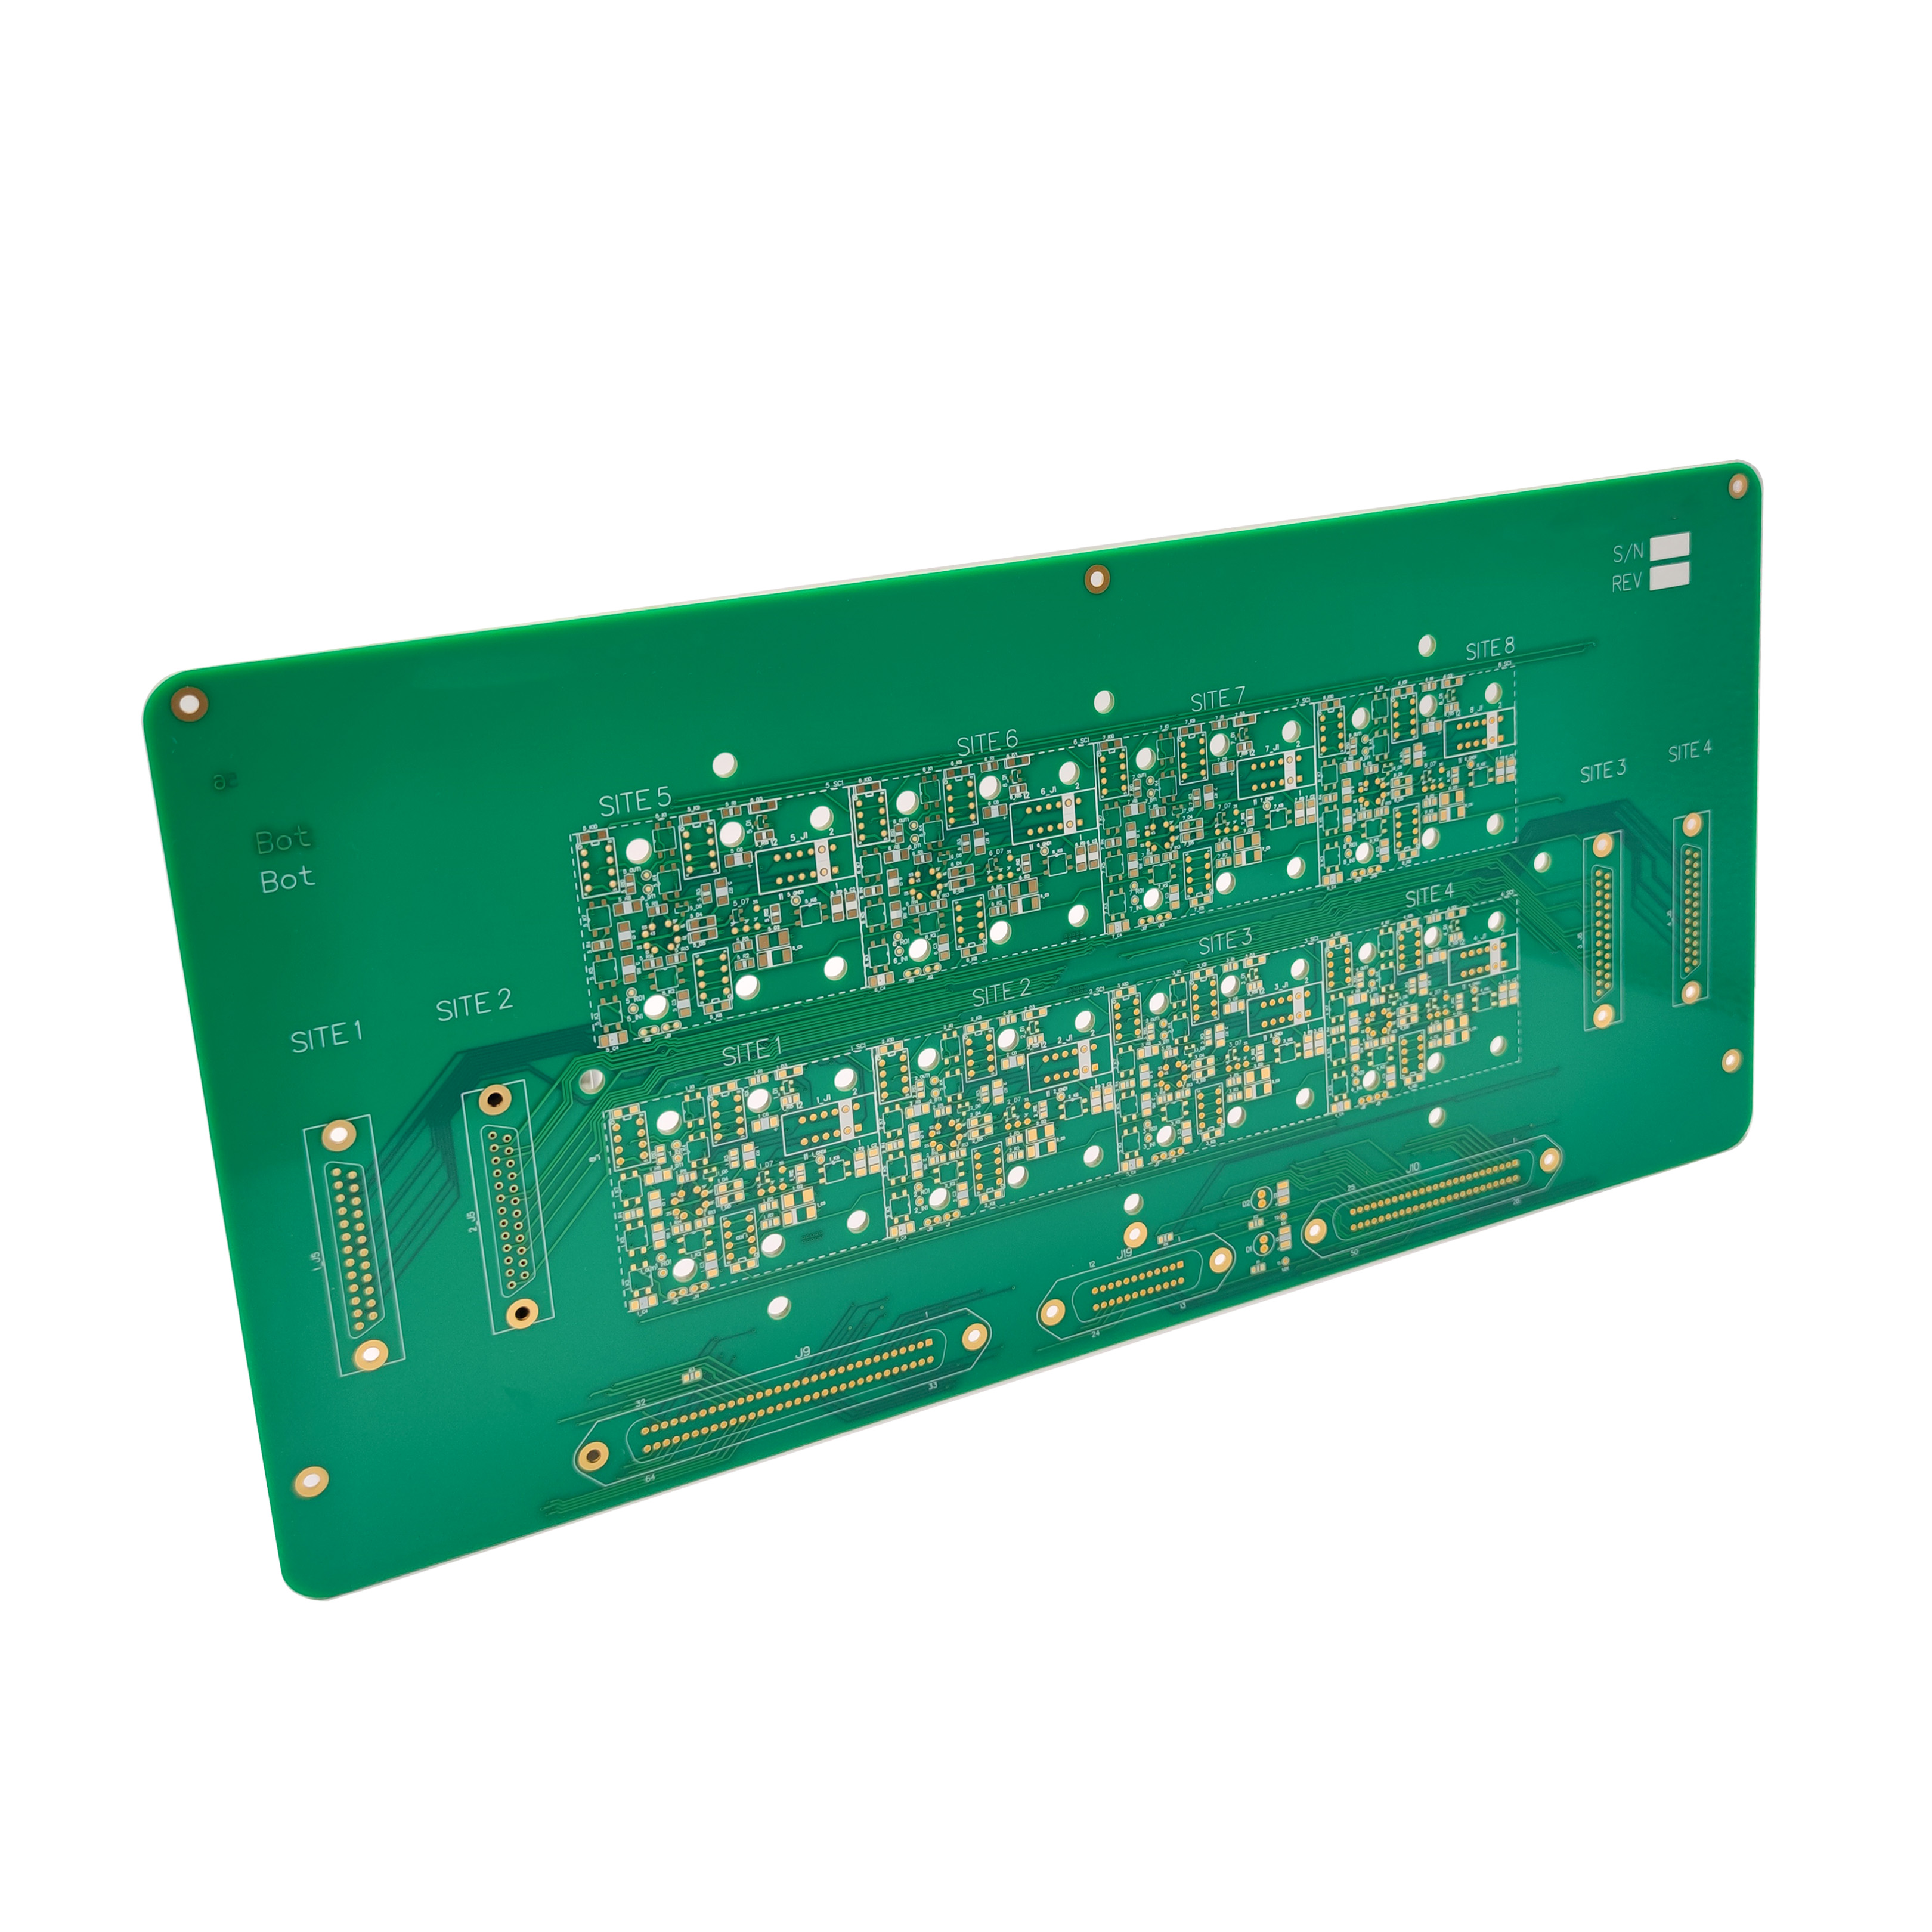 https://www.pcbamodule.com/6-layers-hard-gold-pcb-board-with-3-2mm-board-thickness-and-counter-sink-hole-product/